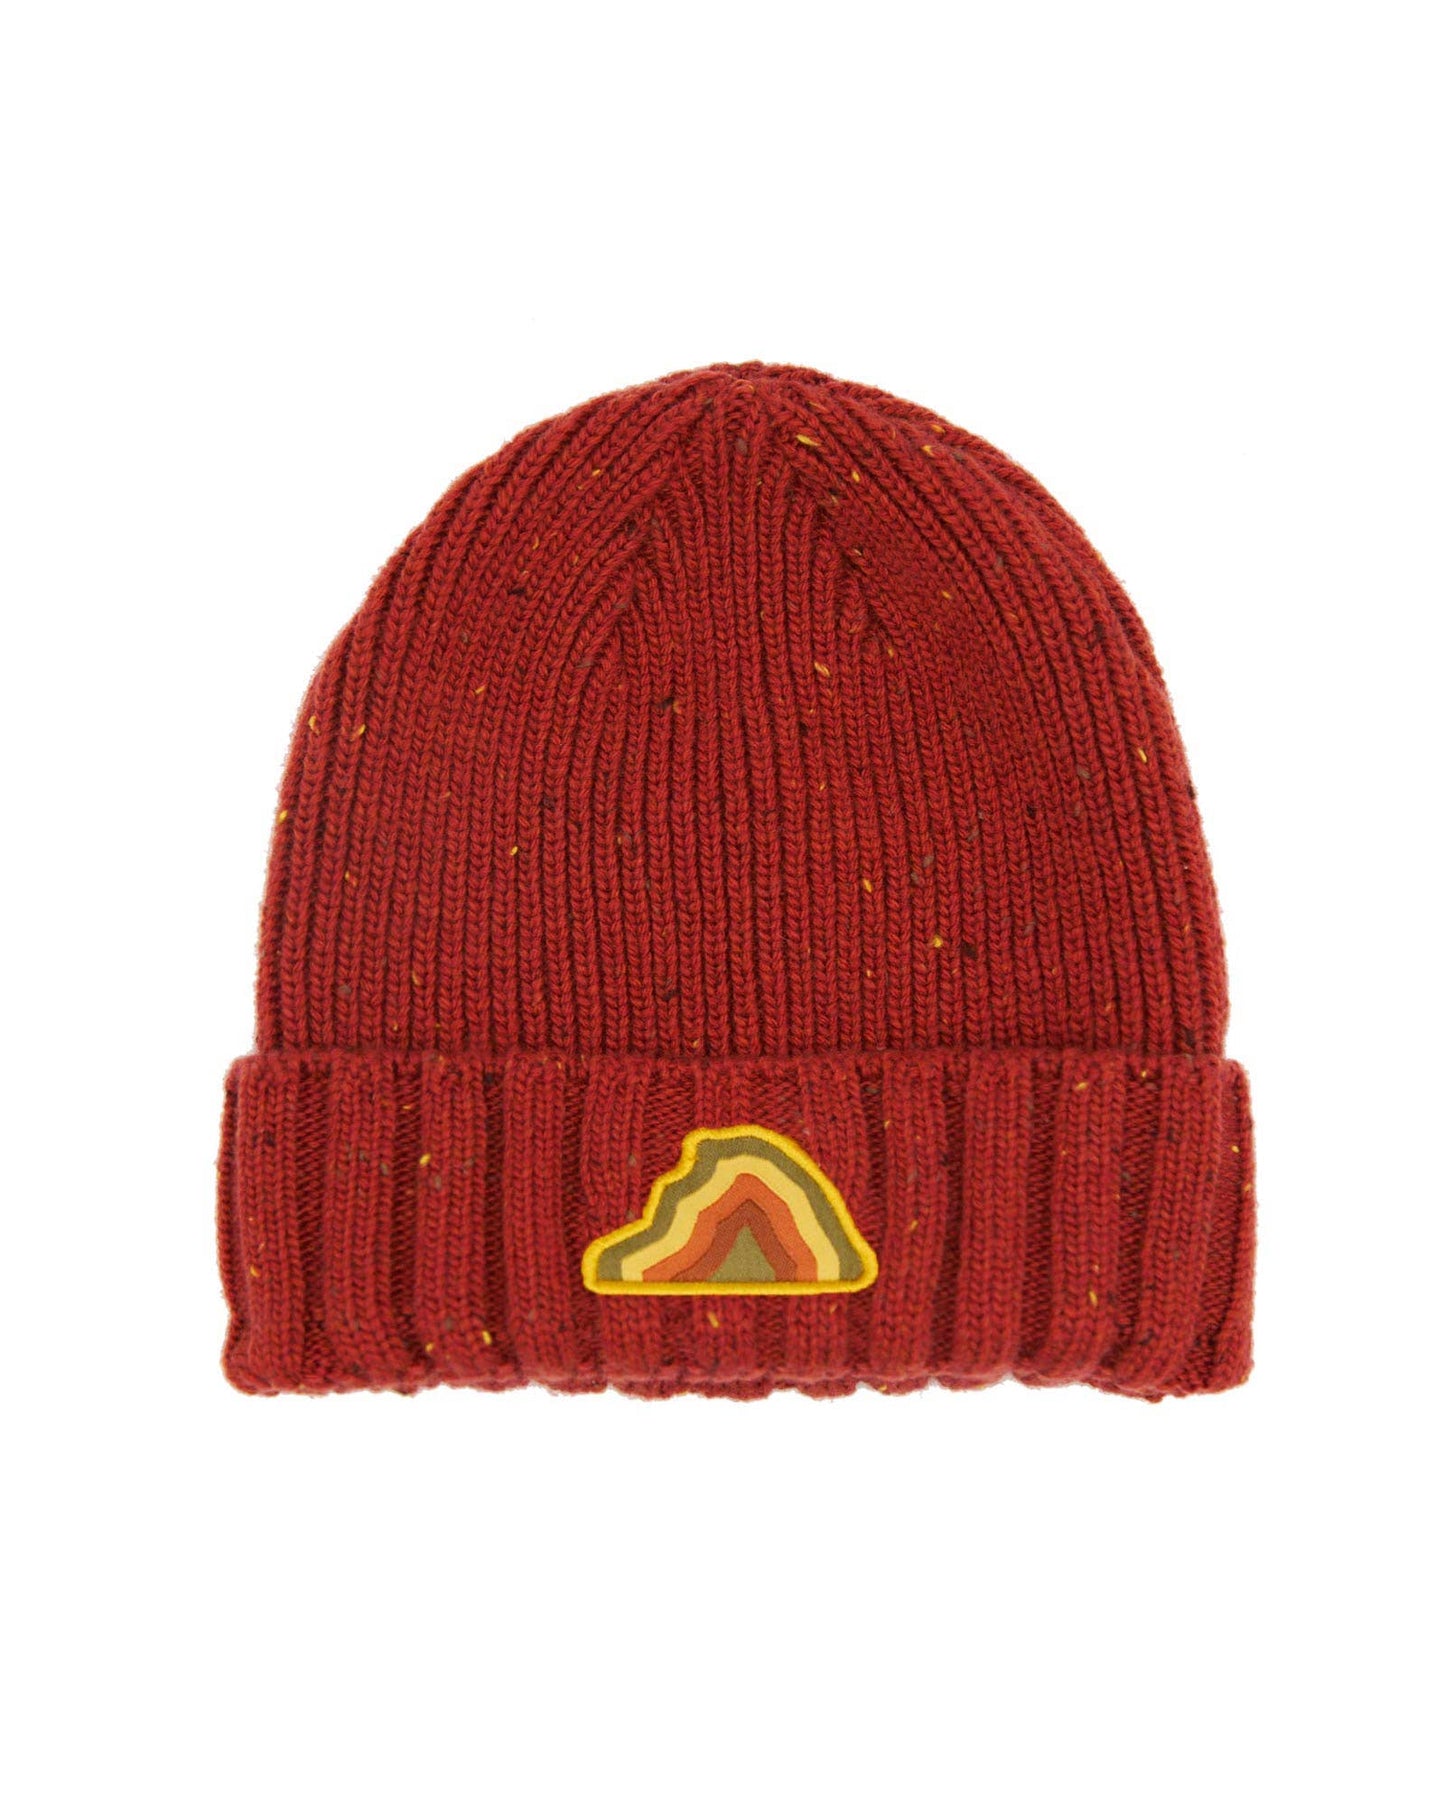 Red Spectradome fleck beanie with half dome patch by Parks Project